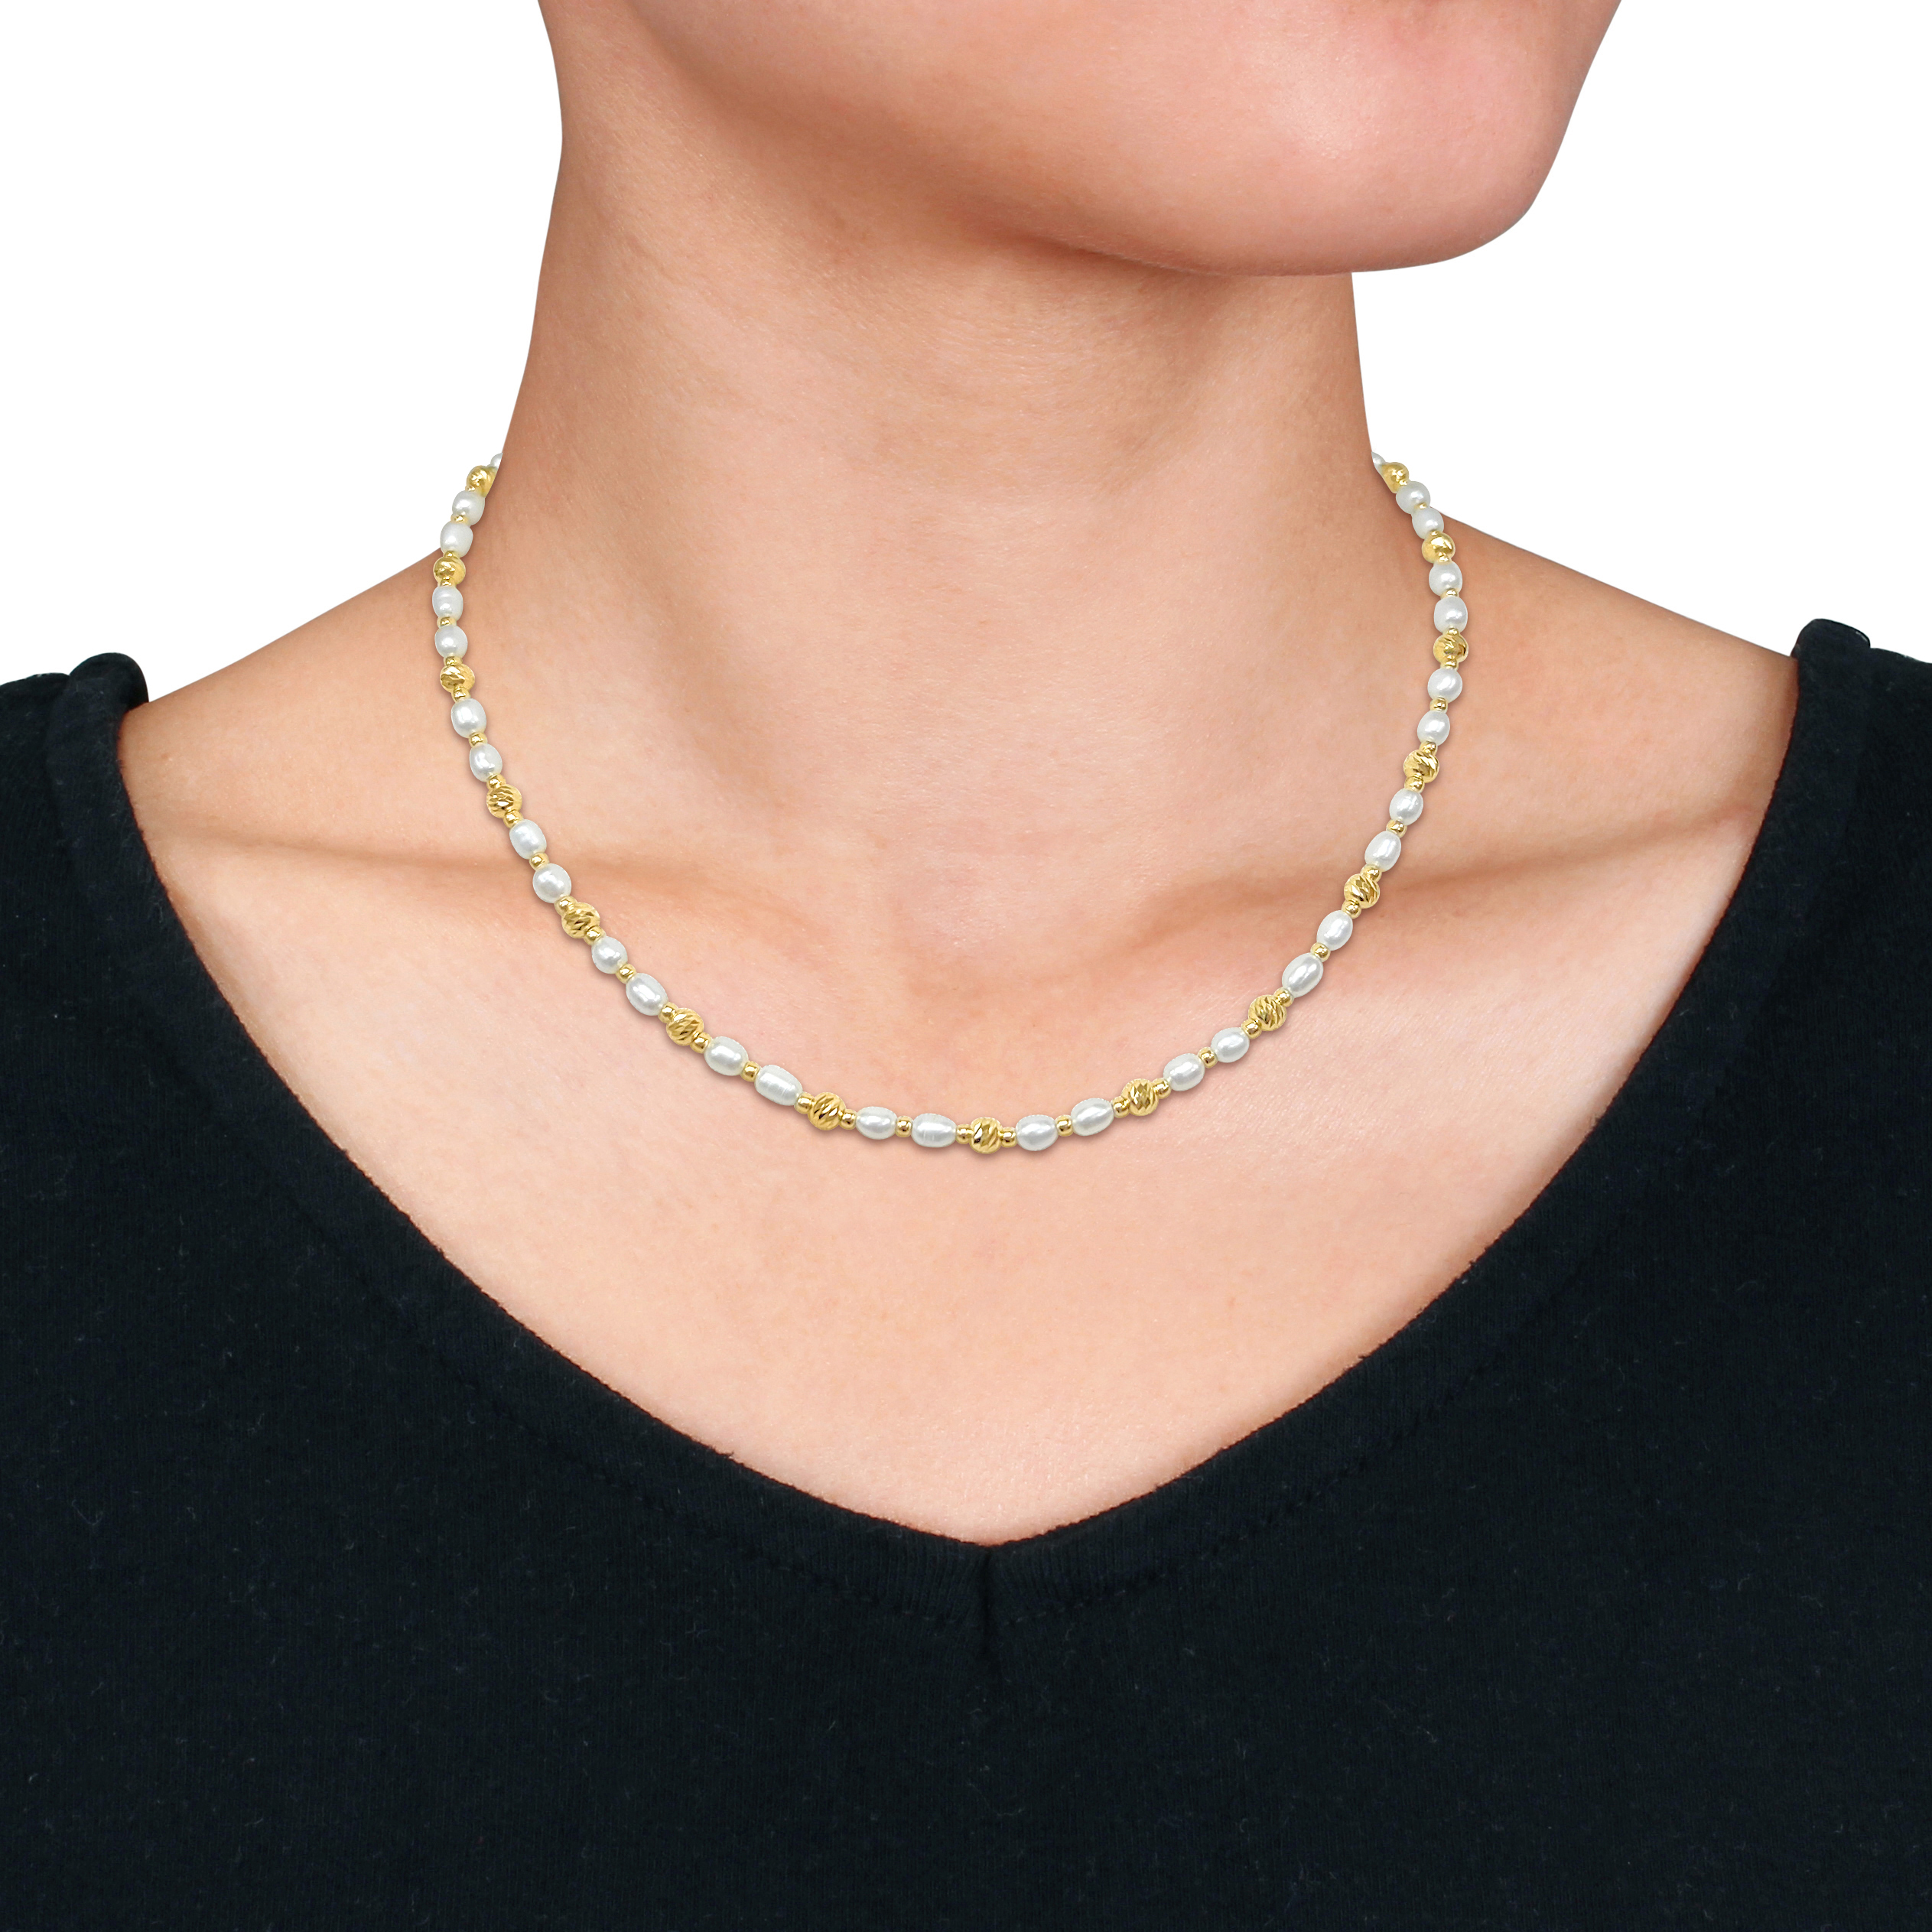 3.5-4 MM Cultured Freshwater and Ball Bead Station Necklace in 18k Gold Plated Sterling Silver - 16+1 in.